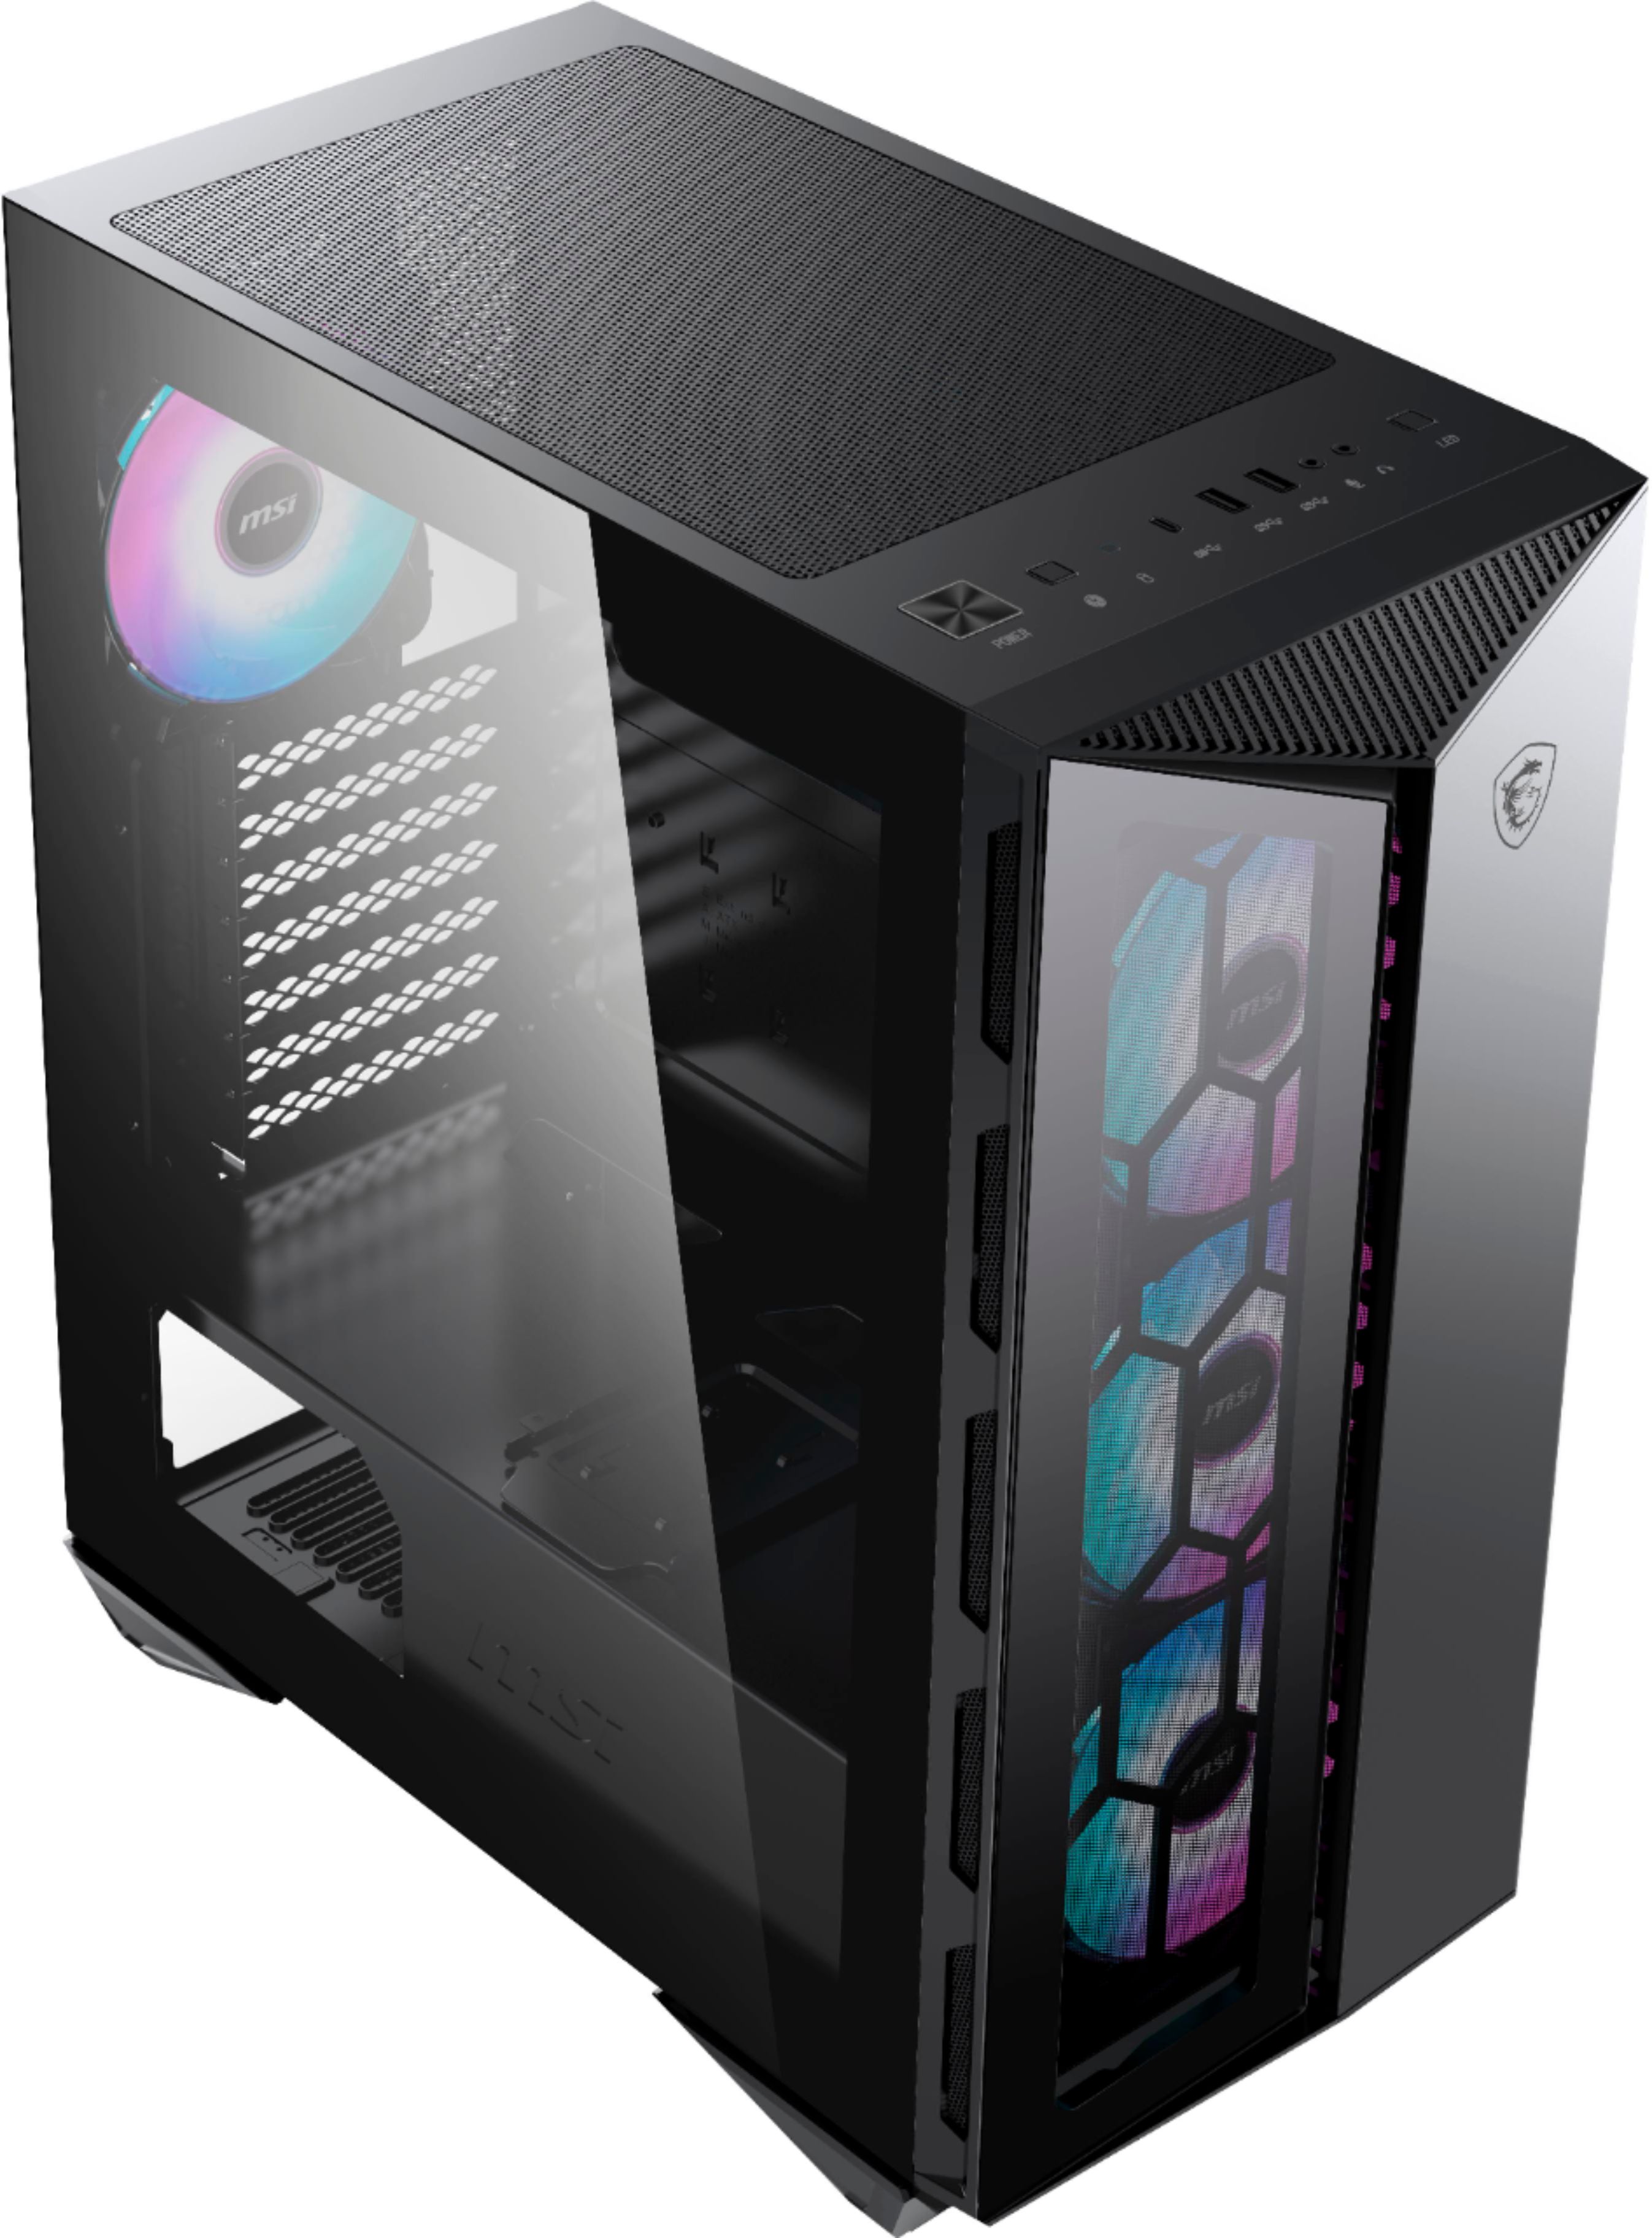 MSI Budget Airflow Case!?, MAG FORGE 110R Black, Easy Gaming PC Build